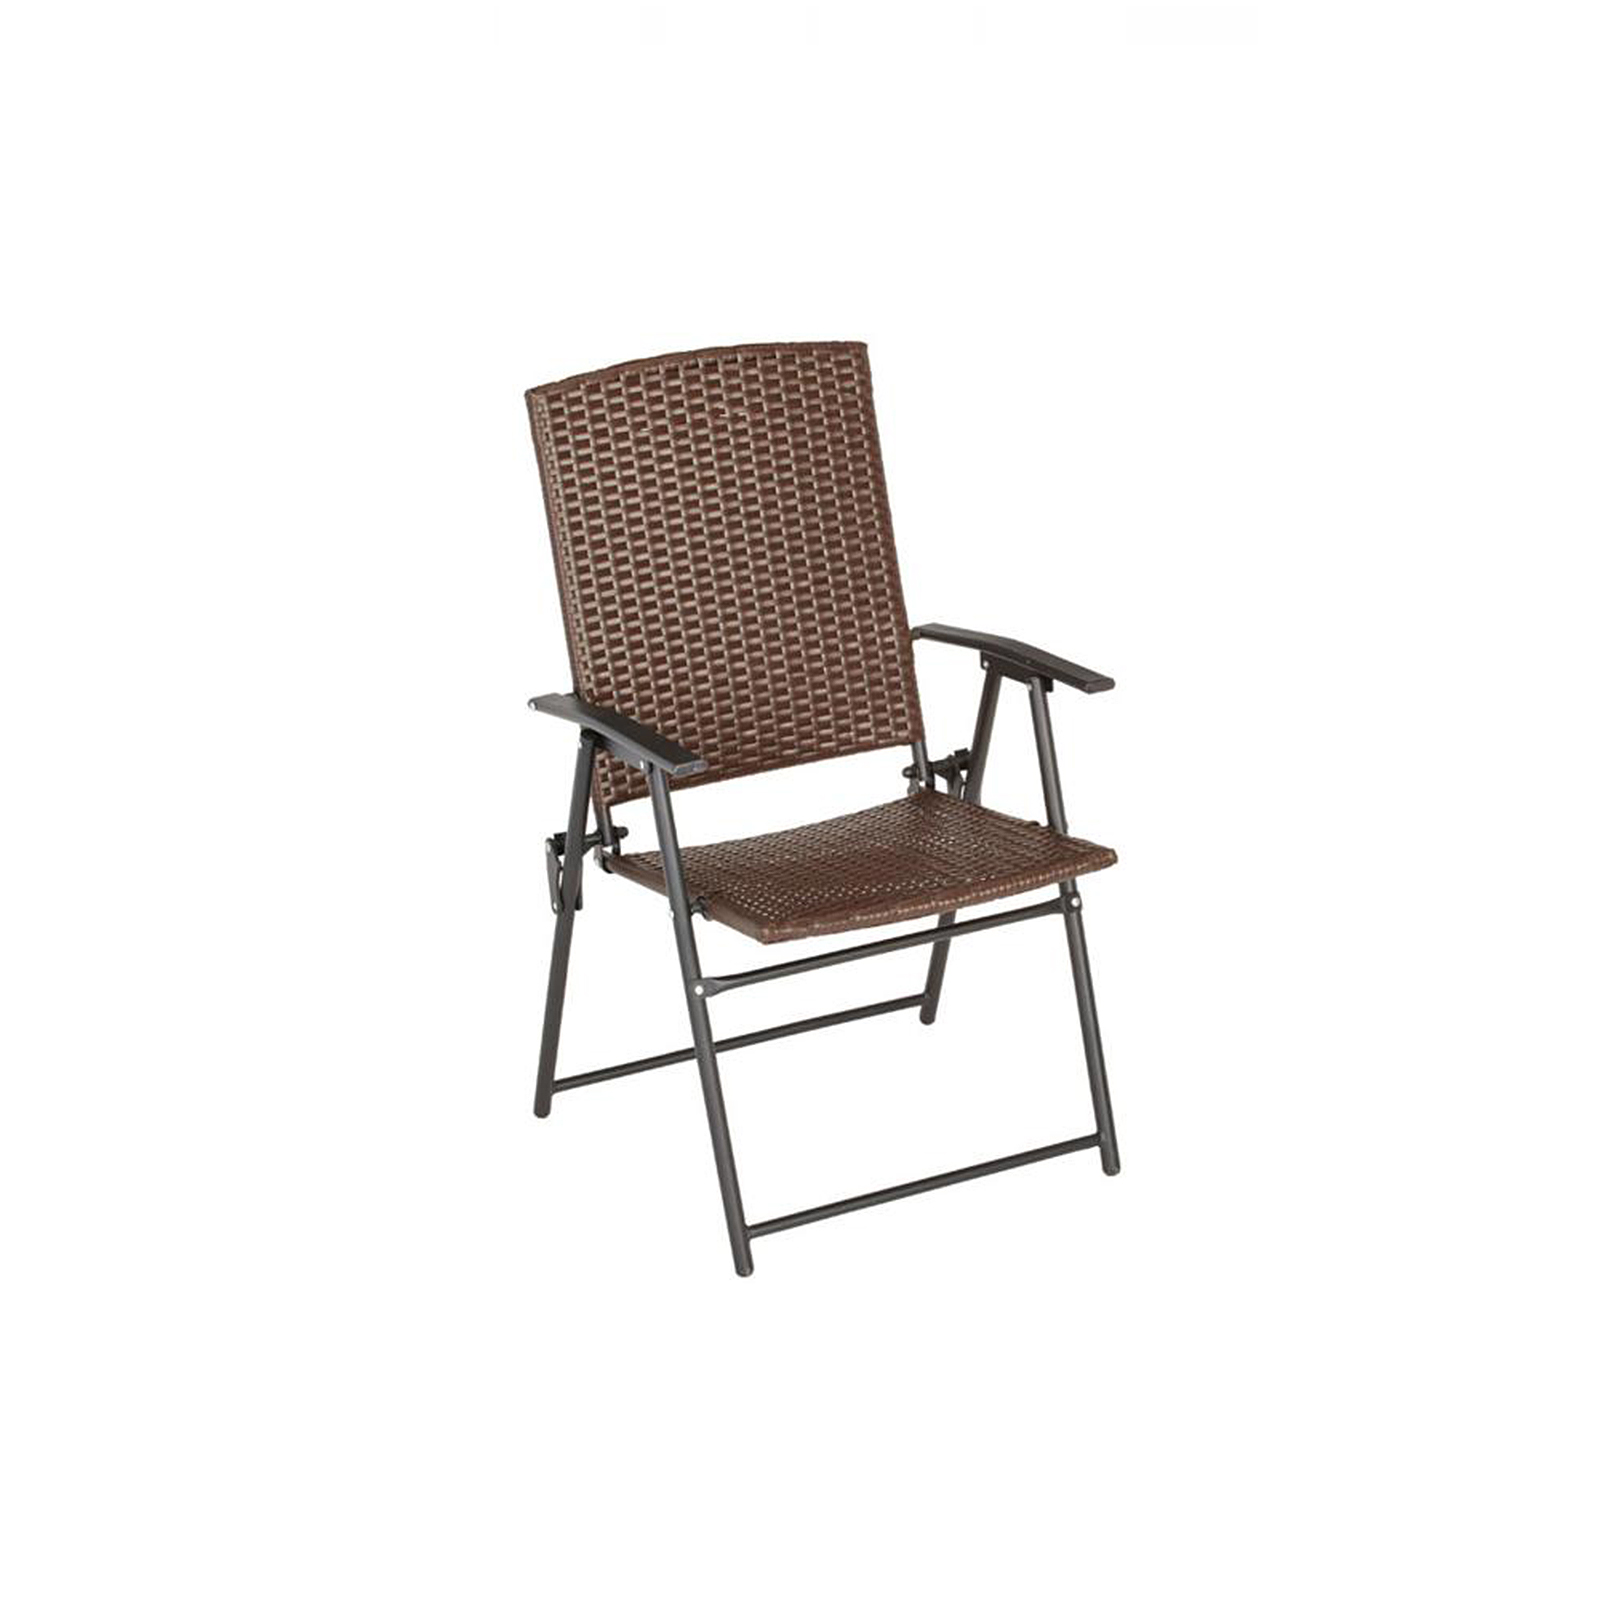 Living Accents Wicker Folding Patio Chair - Brown